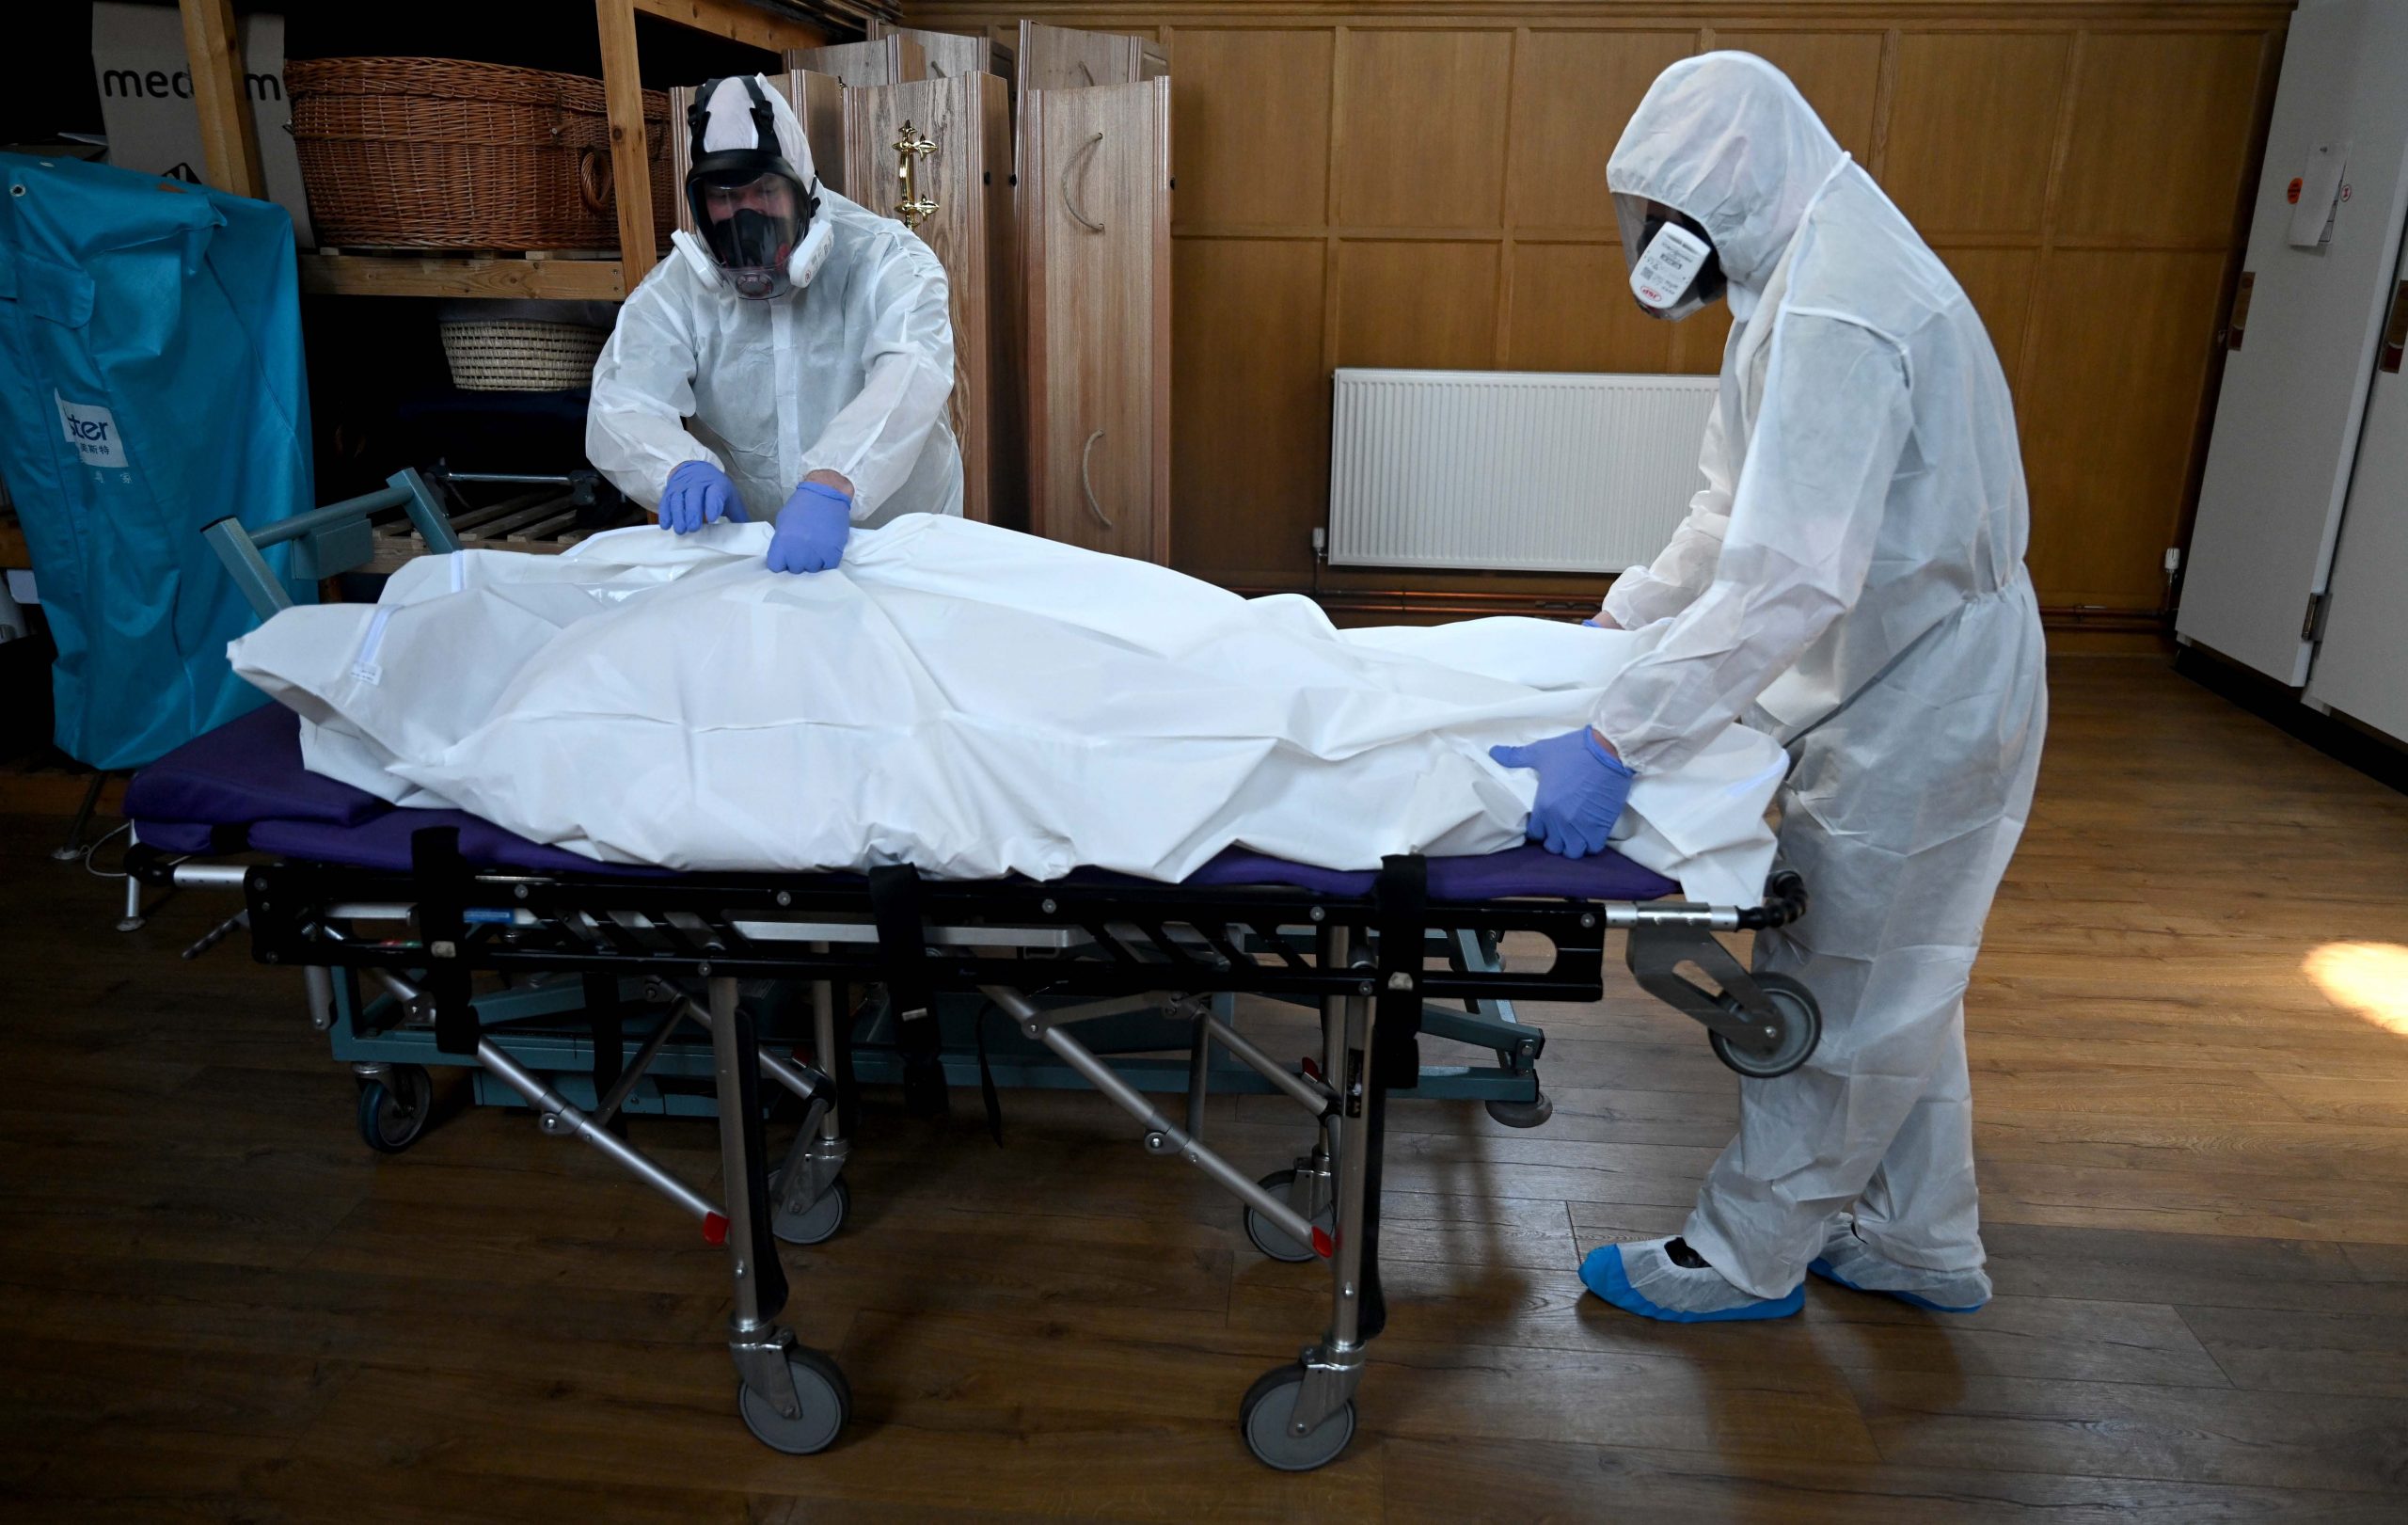 epa08382033 Mortuary workers wear protective suits as they move the body of a person who died from coronavirus at the mortuary of Poppy's Funerals in London, Britain, 24 April 2020. The SARS-CoV-2 coronavirus which causes the Covid-19 disease is having a major affect on funeral services, according to Funeral Director Poppy Mardall who runs Poppy's Funeral's in south London. She says: 'We are much busier with 20-30 percent more people being brought in which is a strain. When handling bodies which have had COVID-19, we must wear protective suits, high grade masks and gloves. All funerals are heavily restricted to around 10 people. People can see the body but can no longer have contact. We are seeing more funerals being streamed online and memorials put to a later date. Instead of flowers, children are drawing them. It is harder for people to do the normal rituals associated with death. It is important to remember than people have died and not treat them like a statistic. Funeral directors are helping people pick up the pieces and sudden death means more trauma.'  EPA/NEIL HALL  ATTENTION: This Image is part of a PHOTO SET